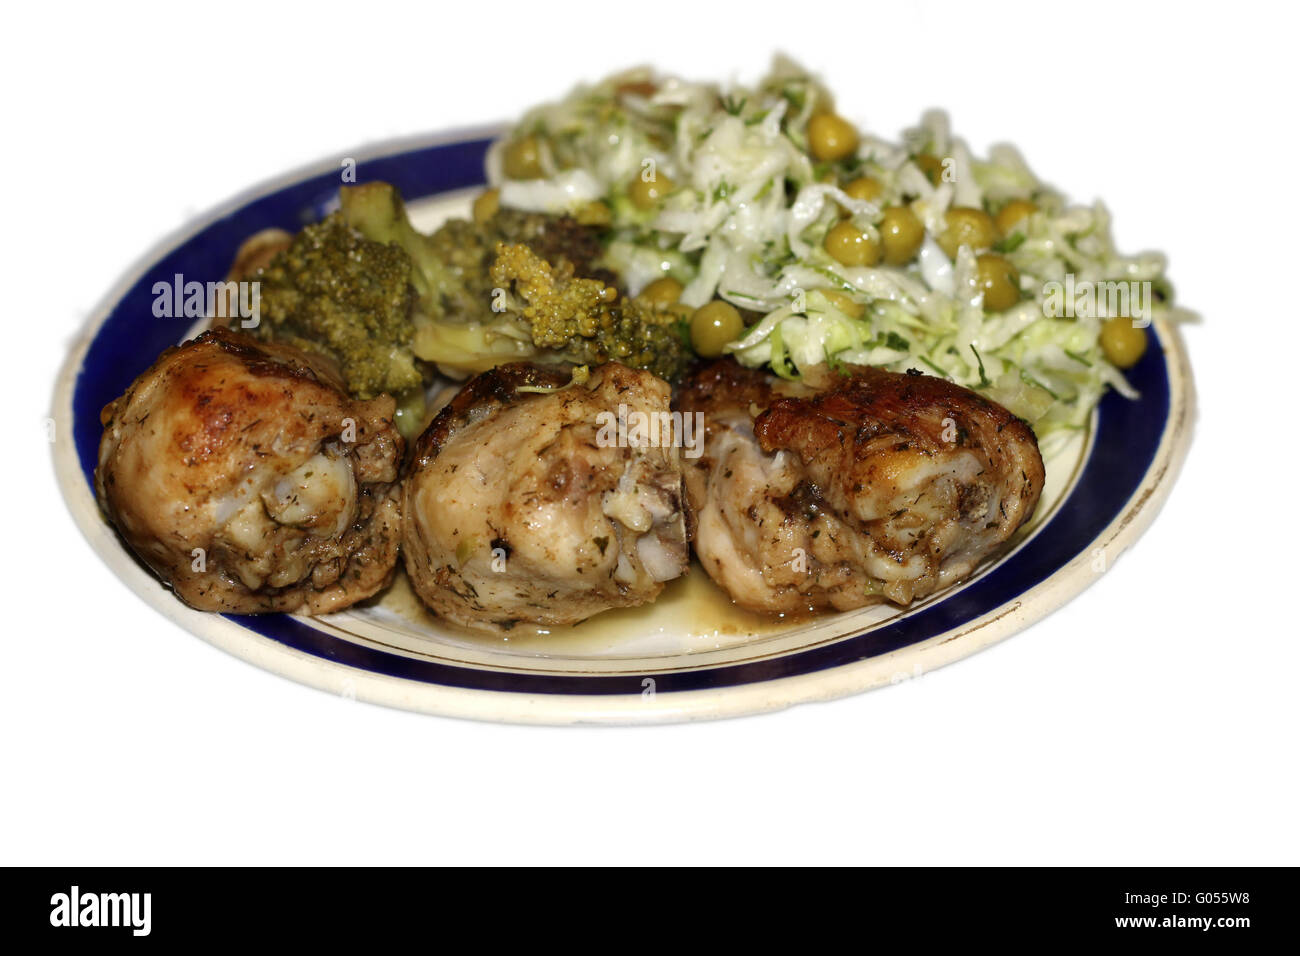 Fried chiken and cabbage broccoli on the plate Stock Photo